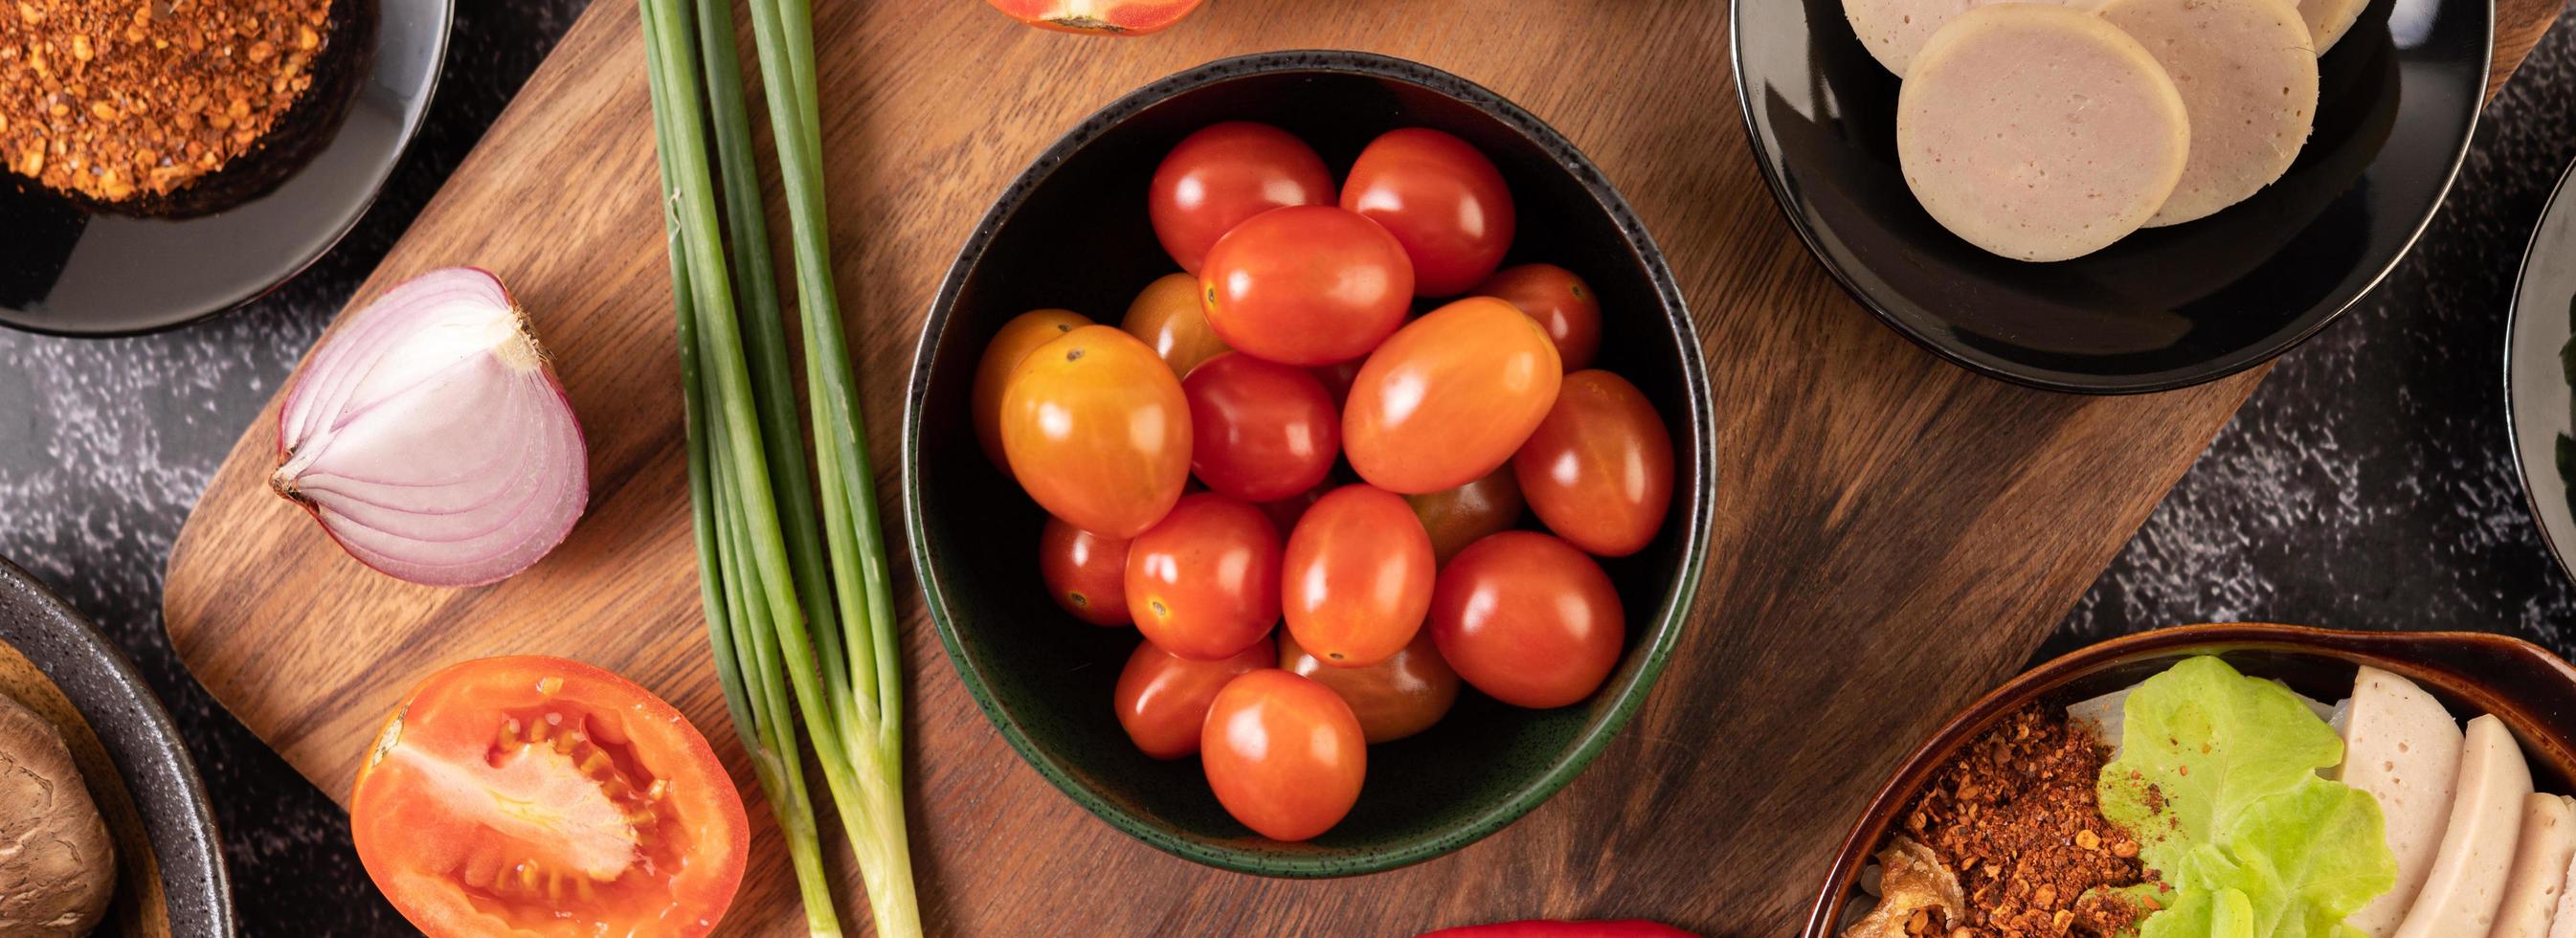 Red cherry tomatoes with spring onions, peppers, tomatoes, and red onions photo